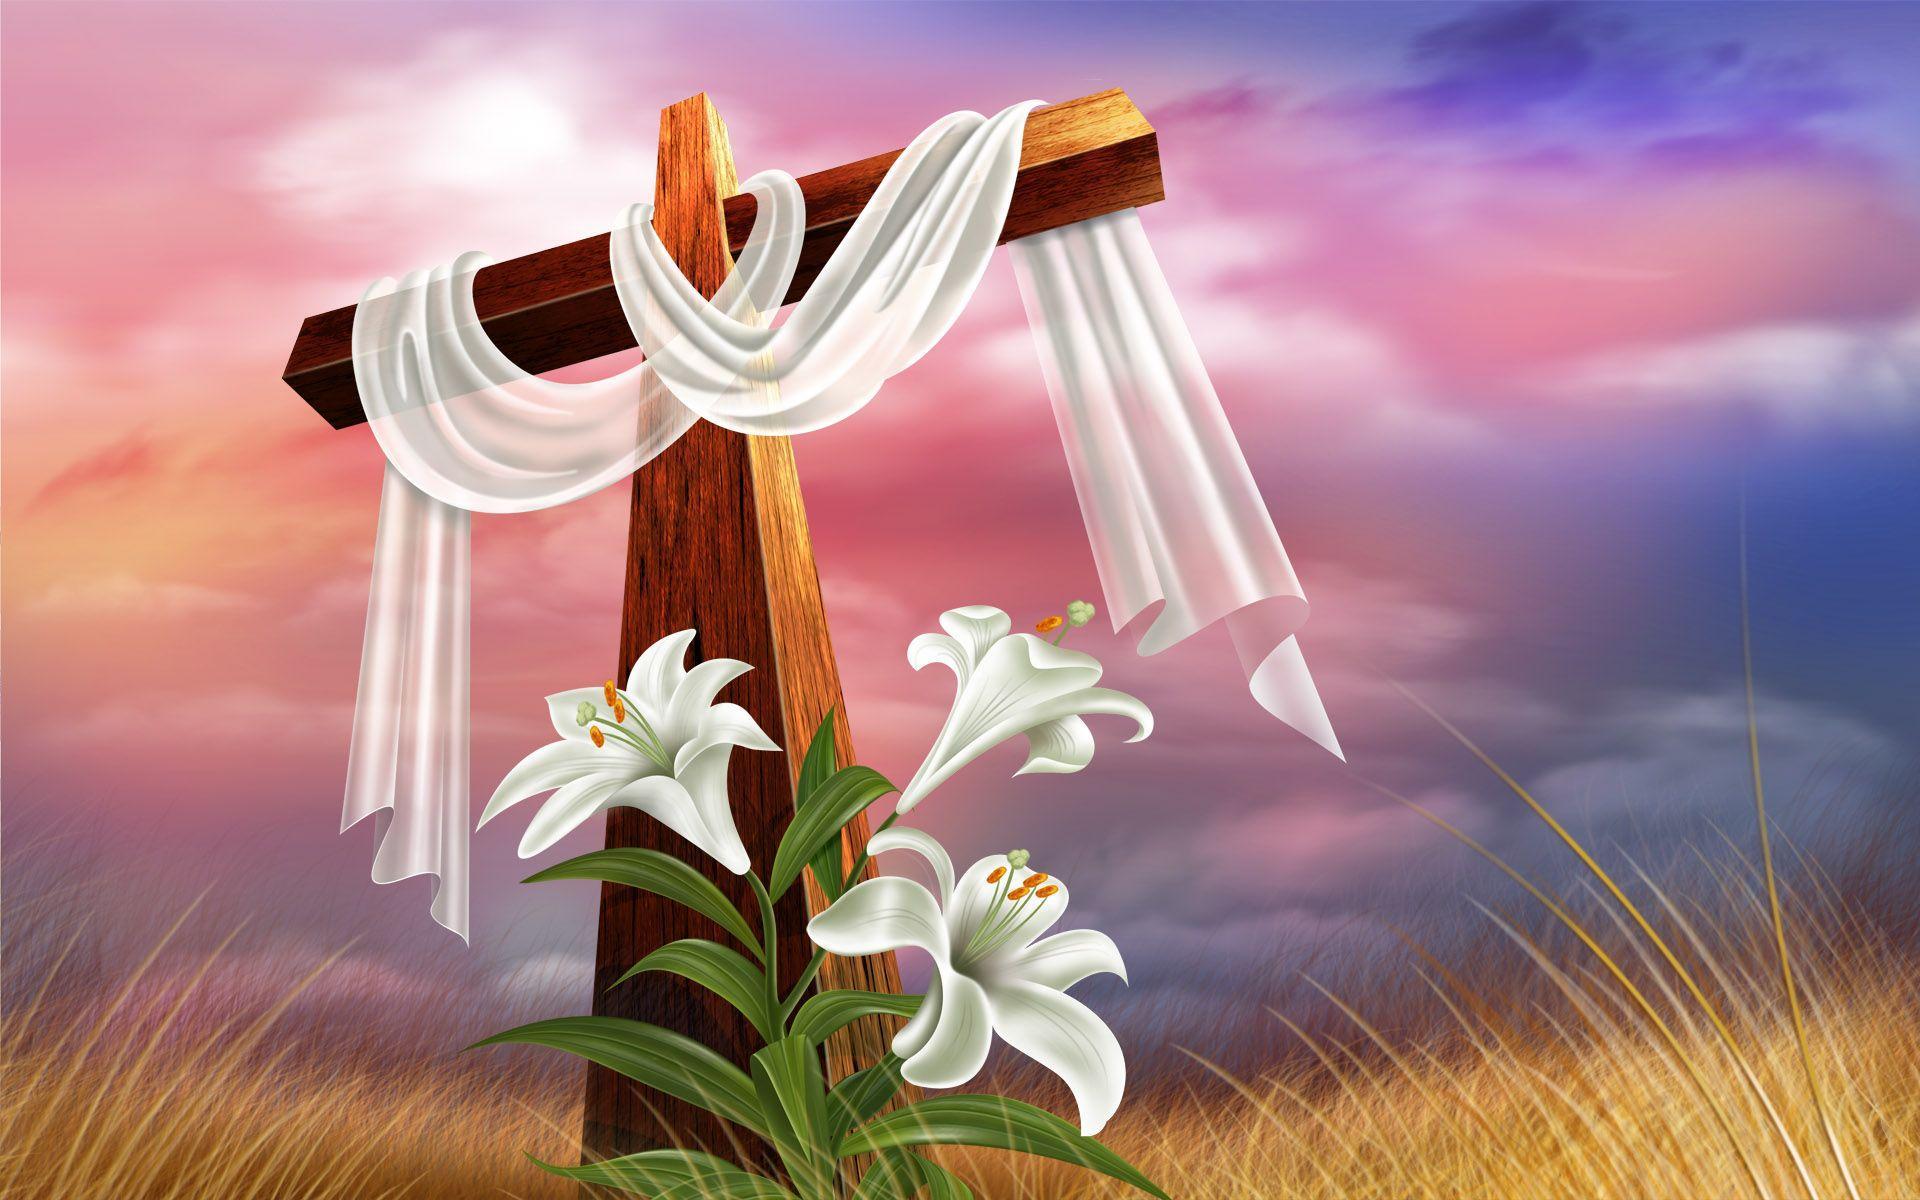 The Great Resurrection wallpaper and image